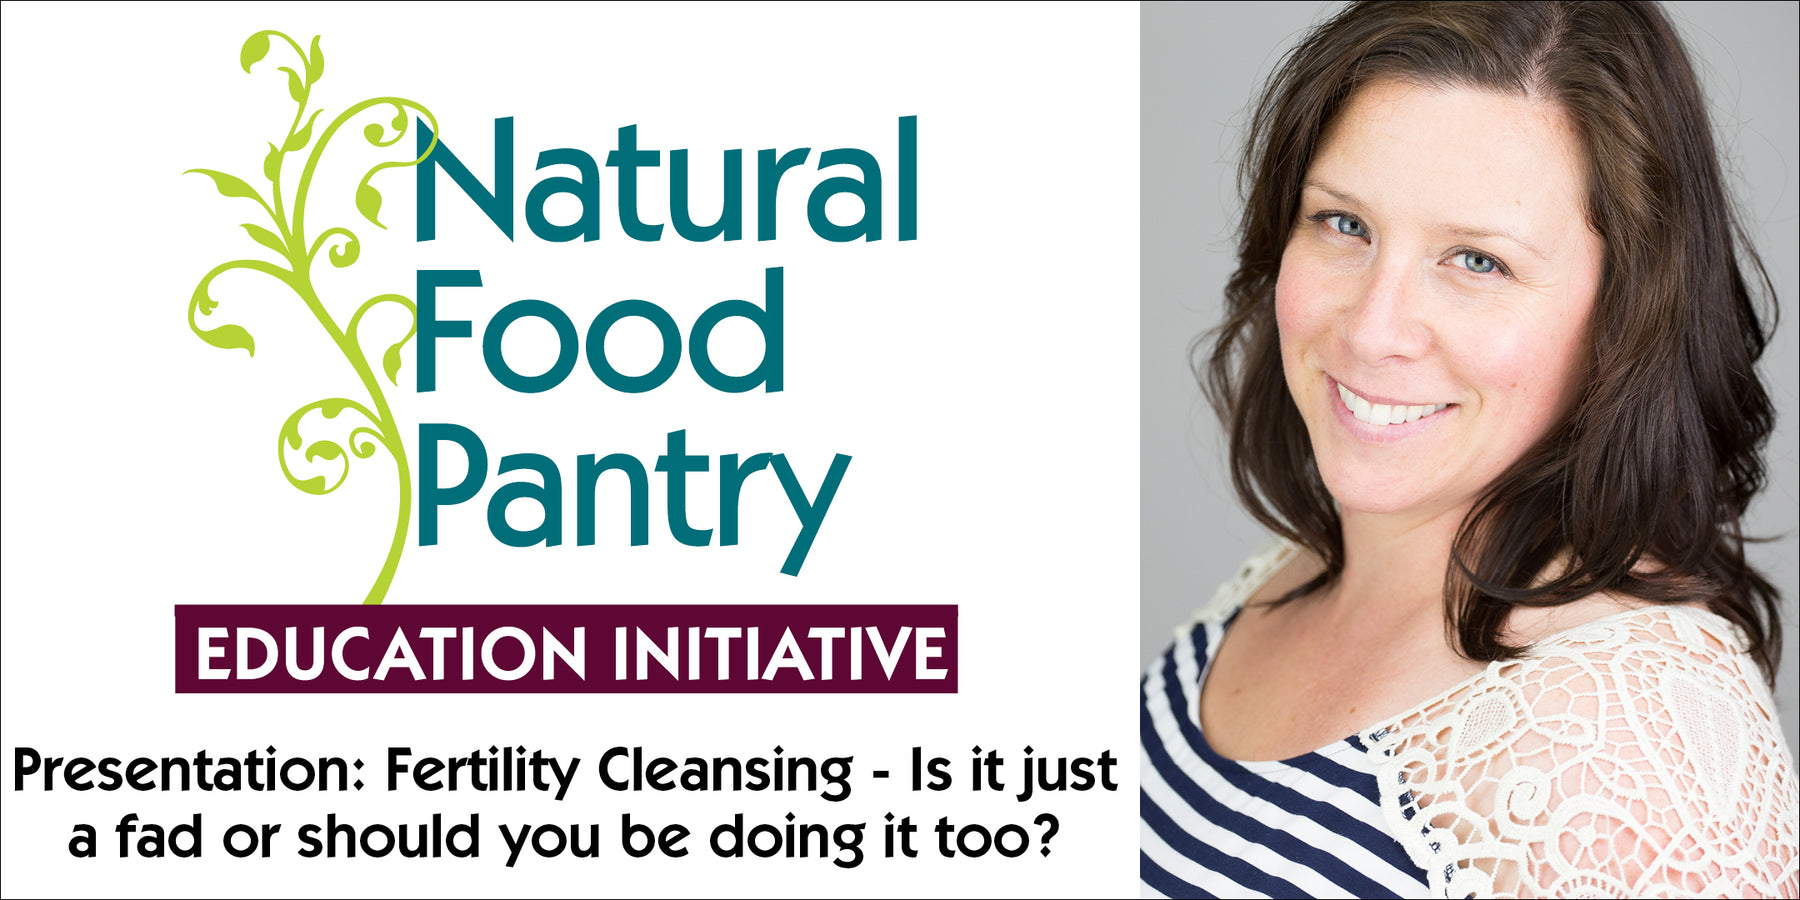 Feb 11:  Fertility Cleansing - Is it just a fad or should you be doing it too?